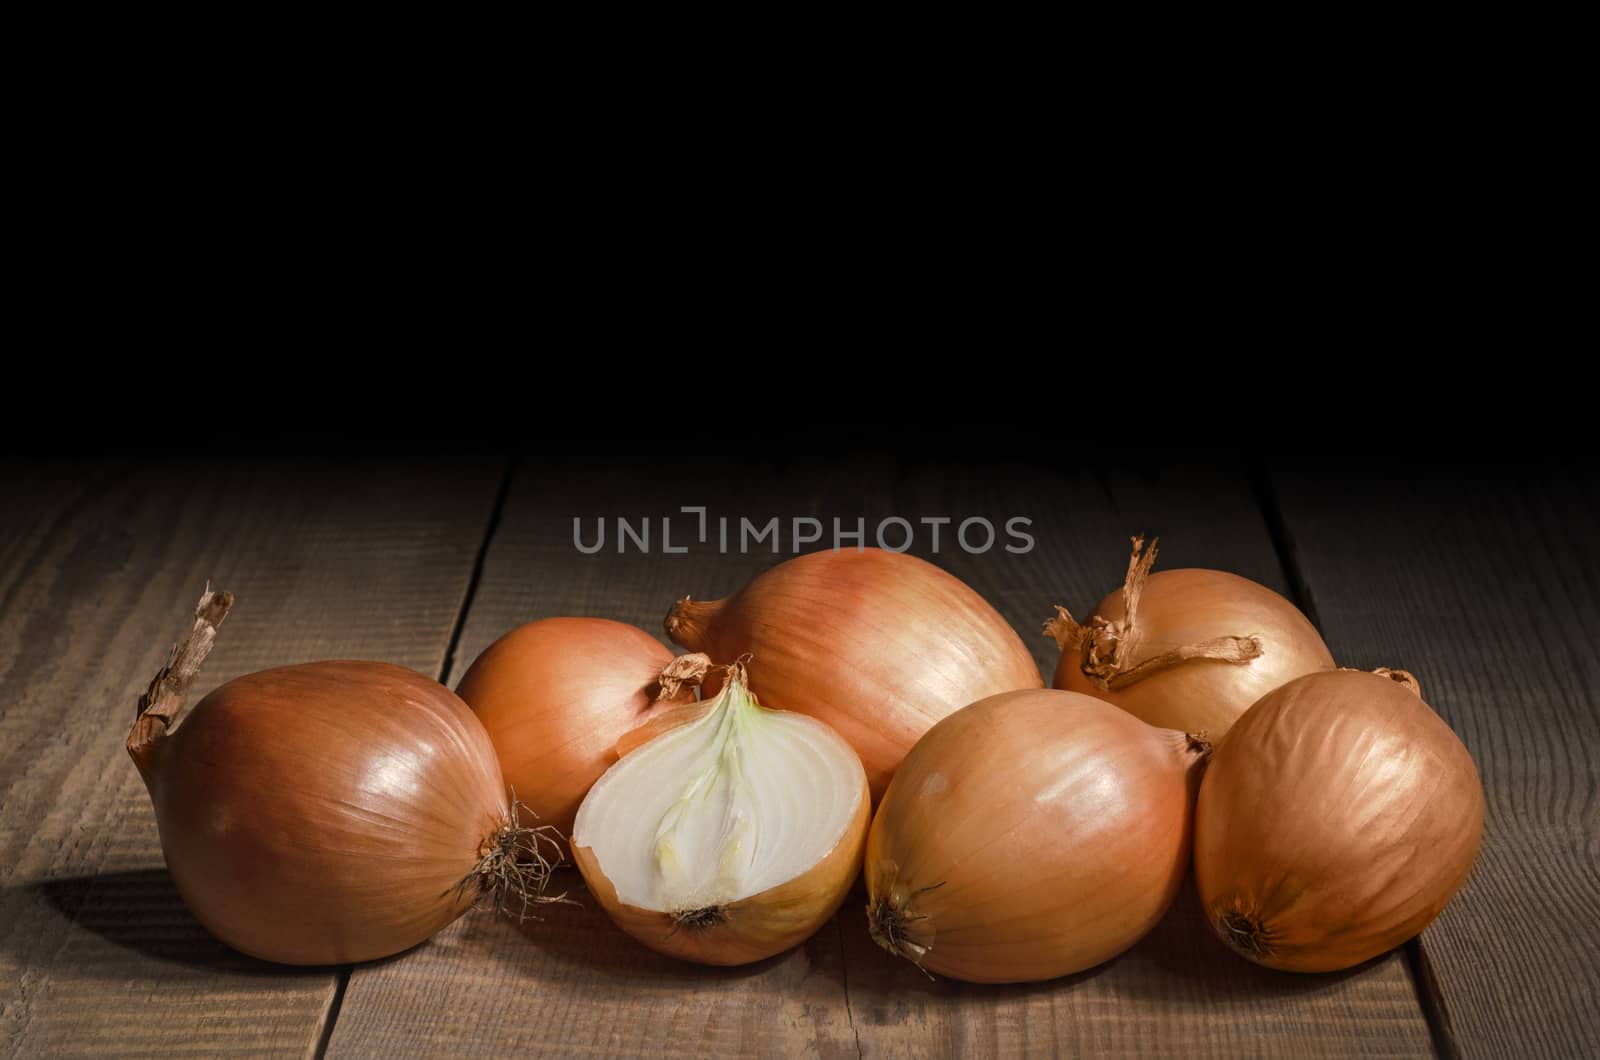 Raw onion is laying on an old wooden table and a black background. Plenty of space for text.